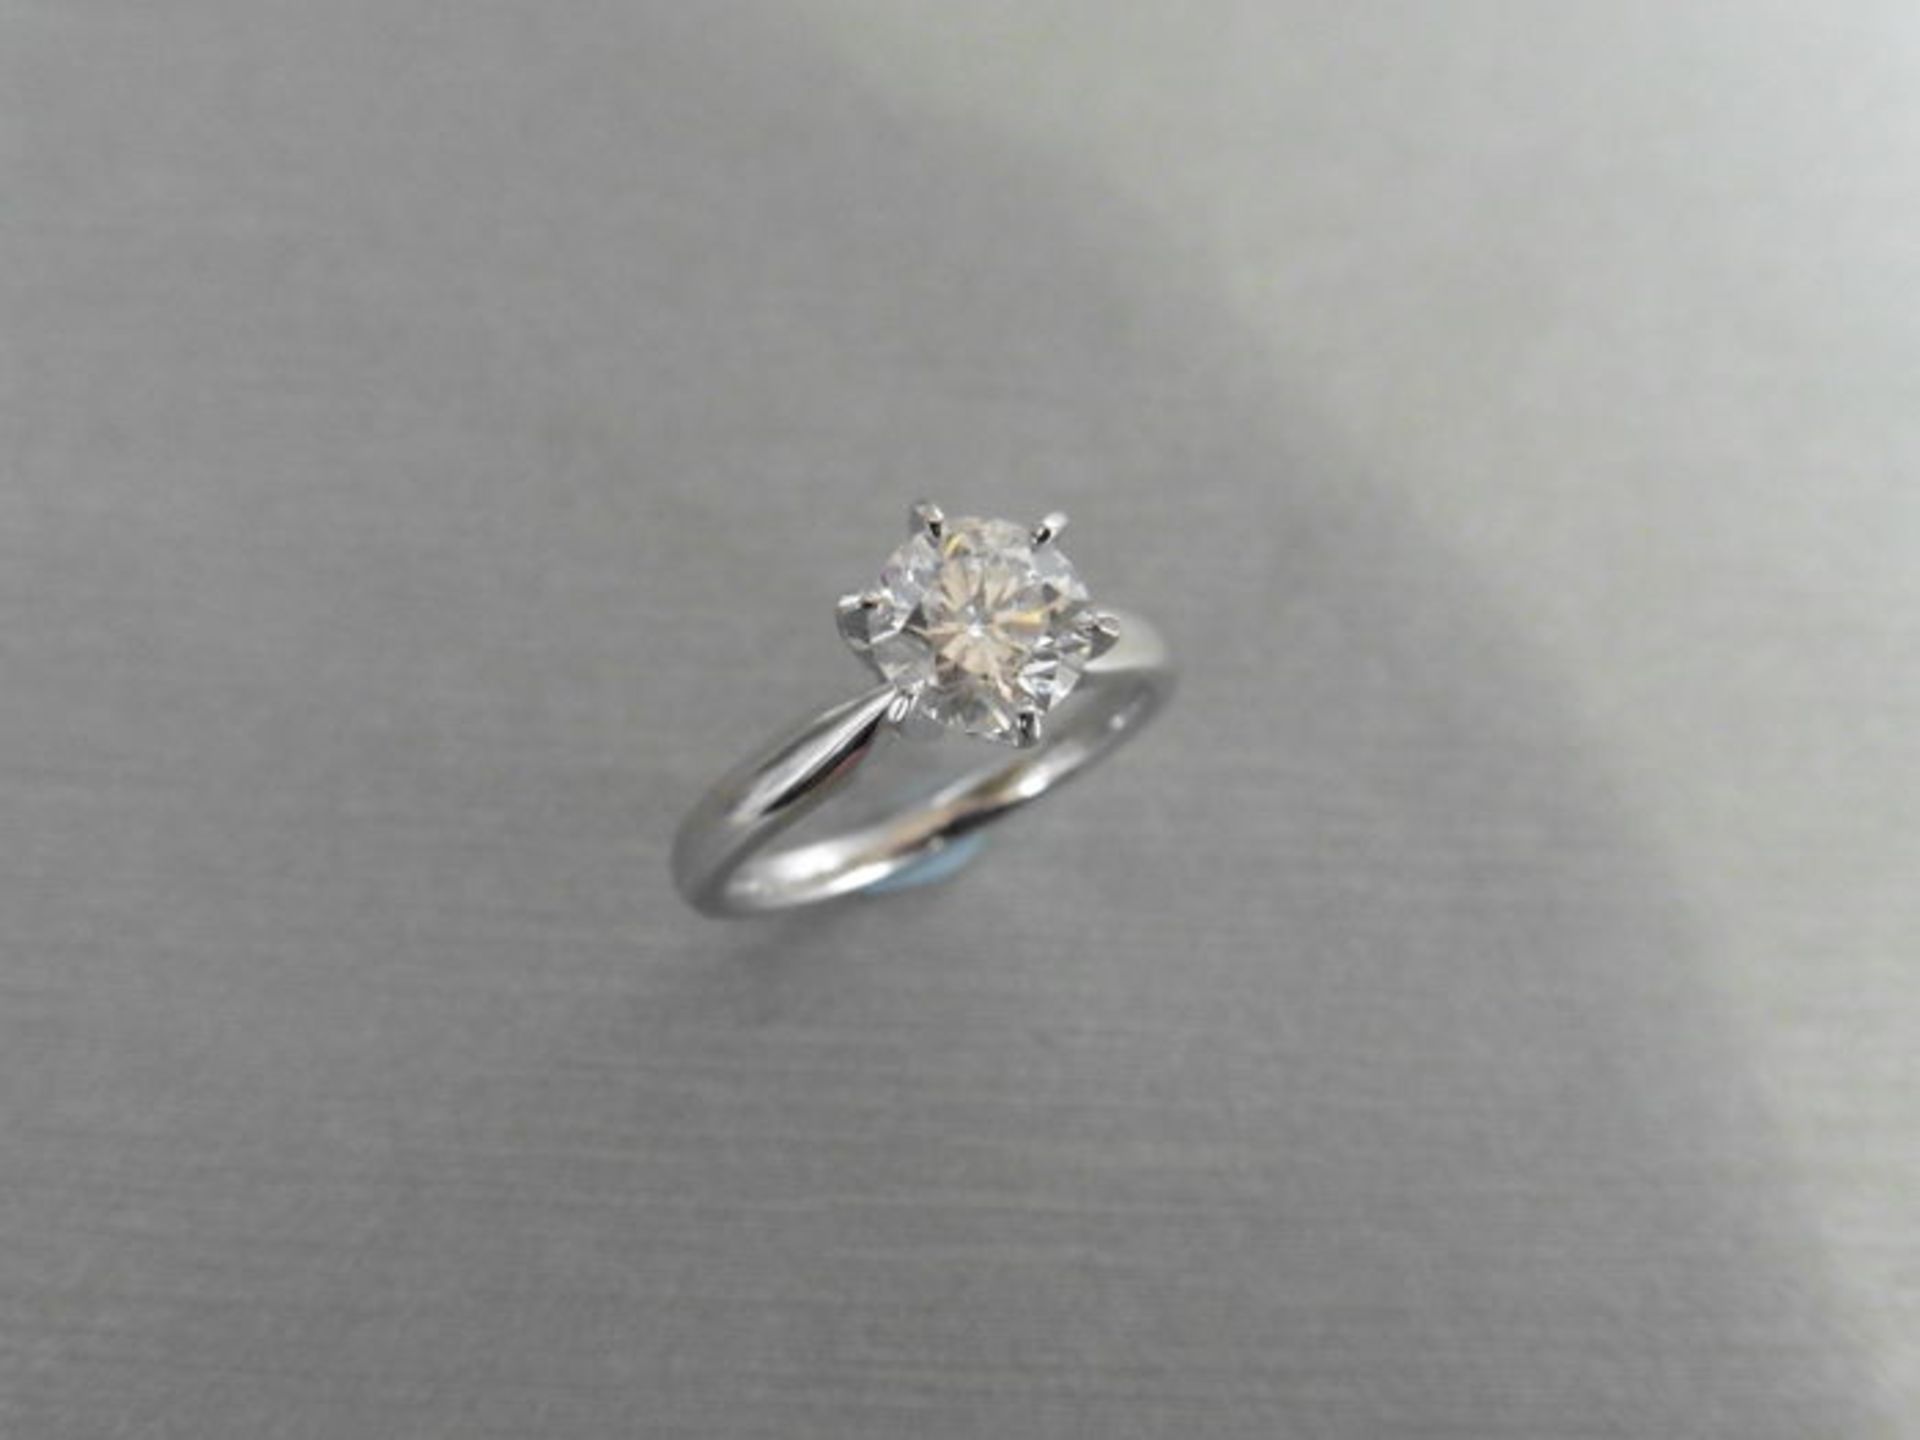 1.05ct Diamond solitaire ring with a brilliant cut diamond, J colour and Si1 clarity. Set in